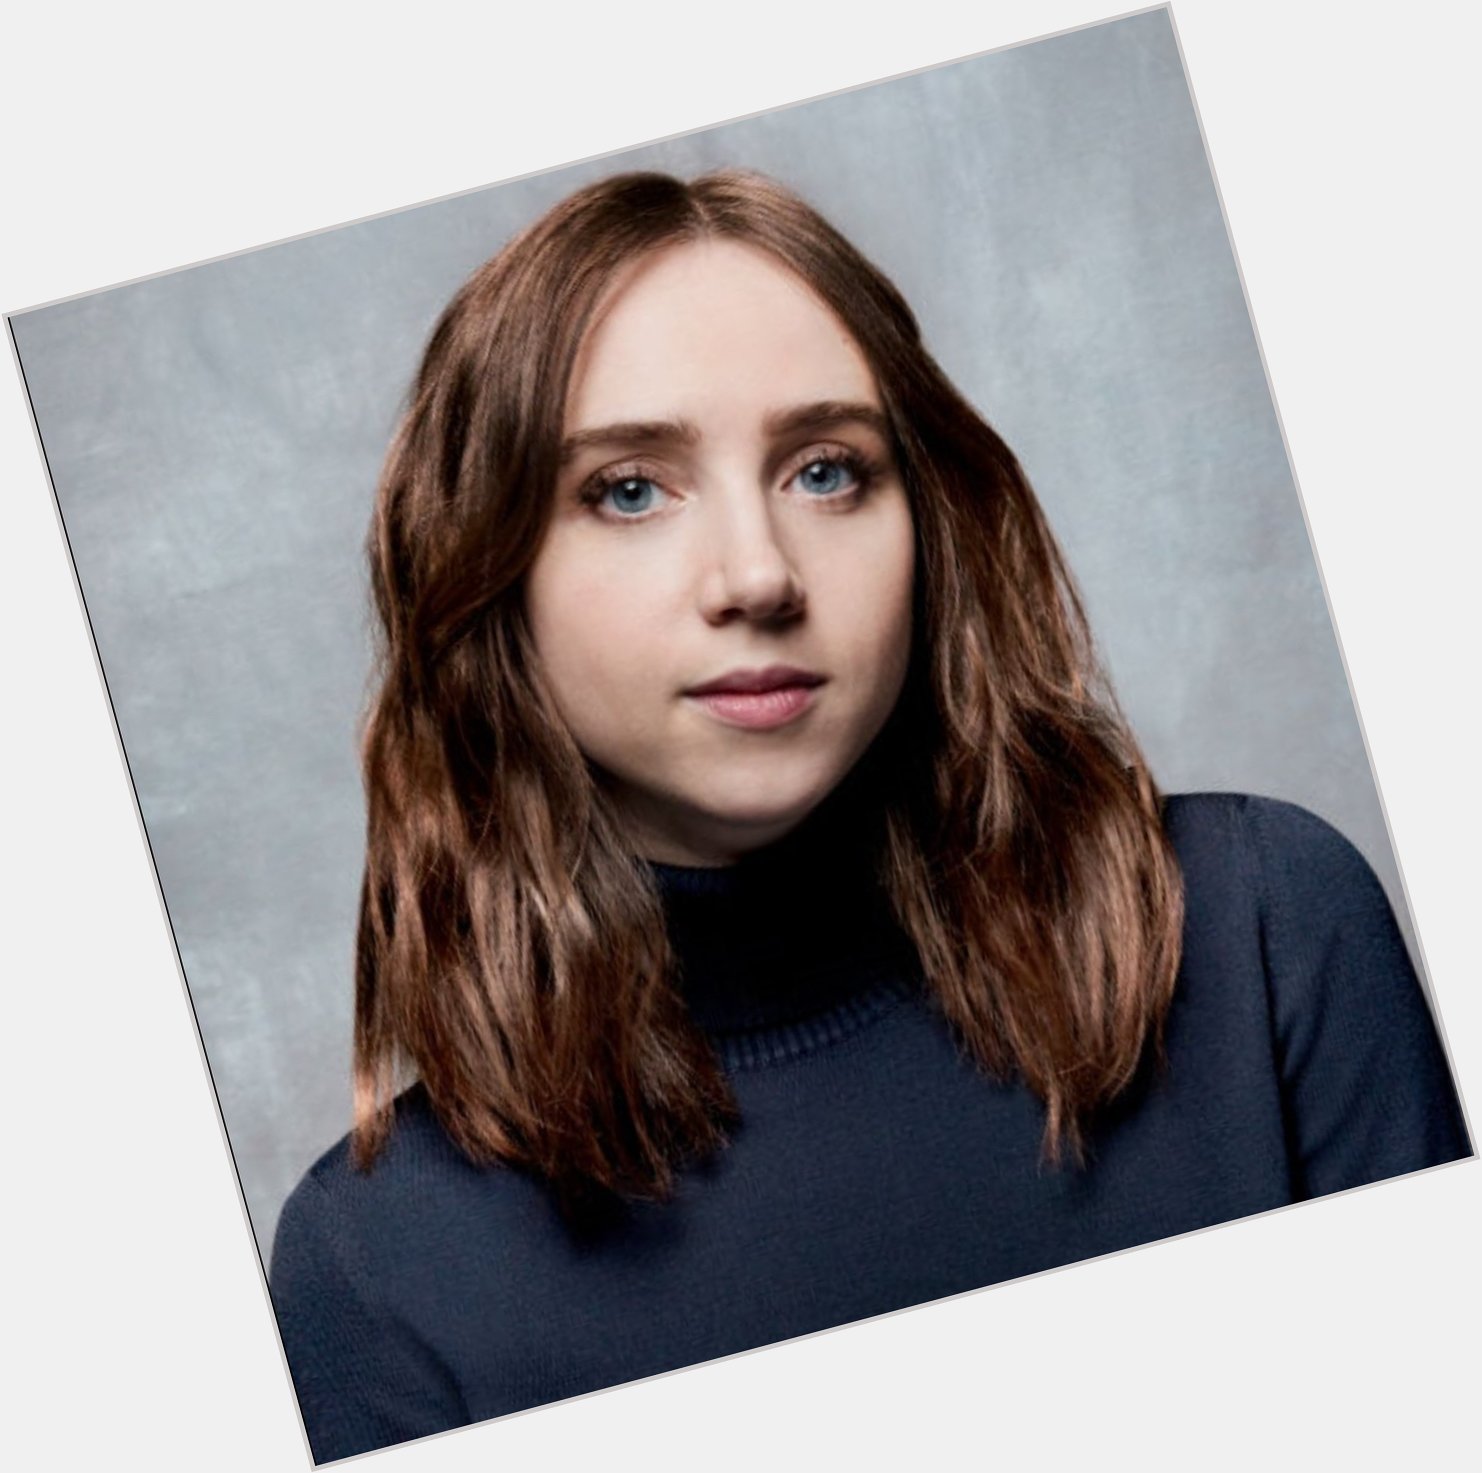 Happy 37th birthday to Zoe Kazan!!

Which is your favorite role from her? 